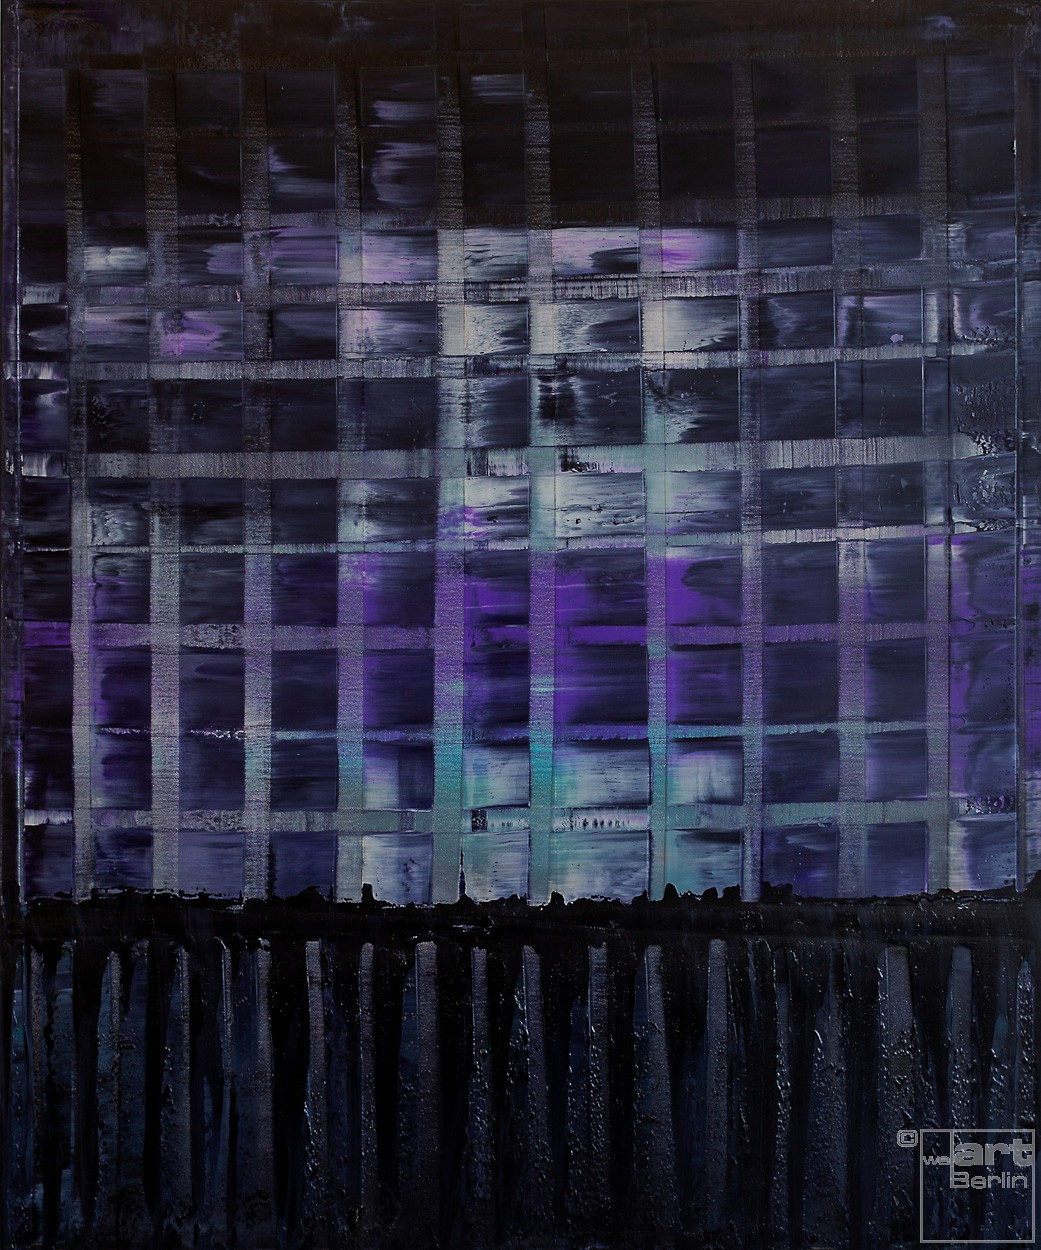 Violet ARMA | Painting by Lali Torma | oil on canvas, abstract